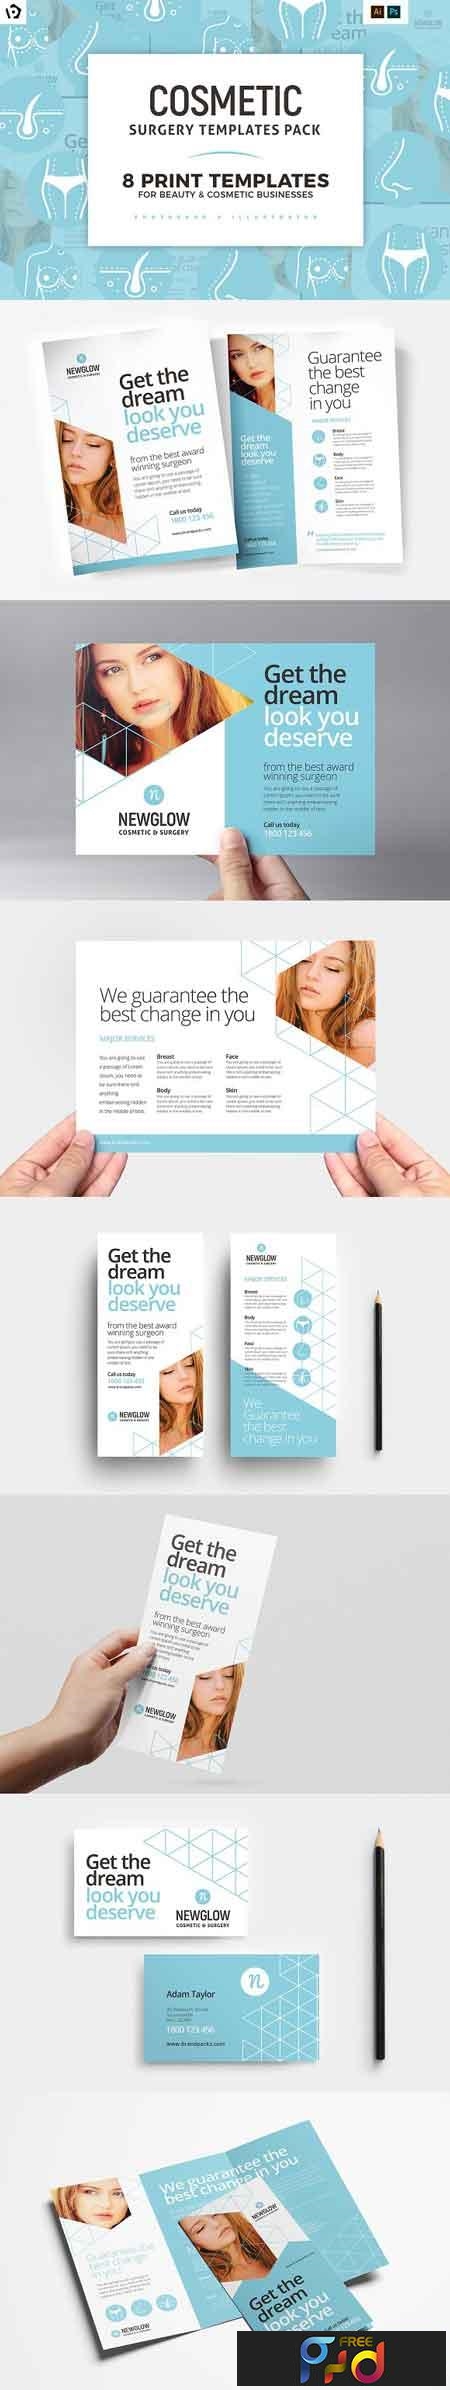 FreePsdVn.com 1814121 TEMPLATE cosmetic surgery templates pack 3015371